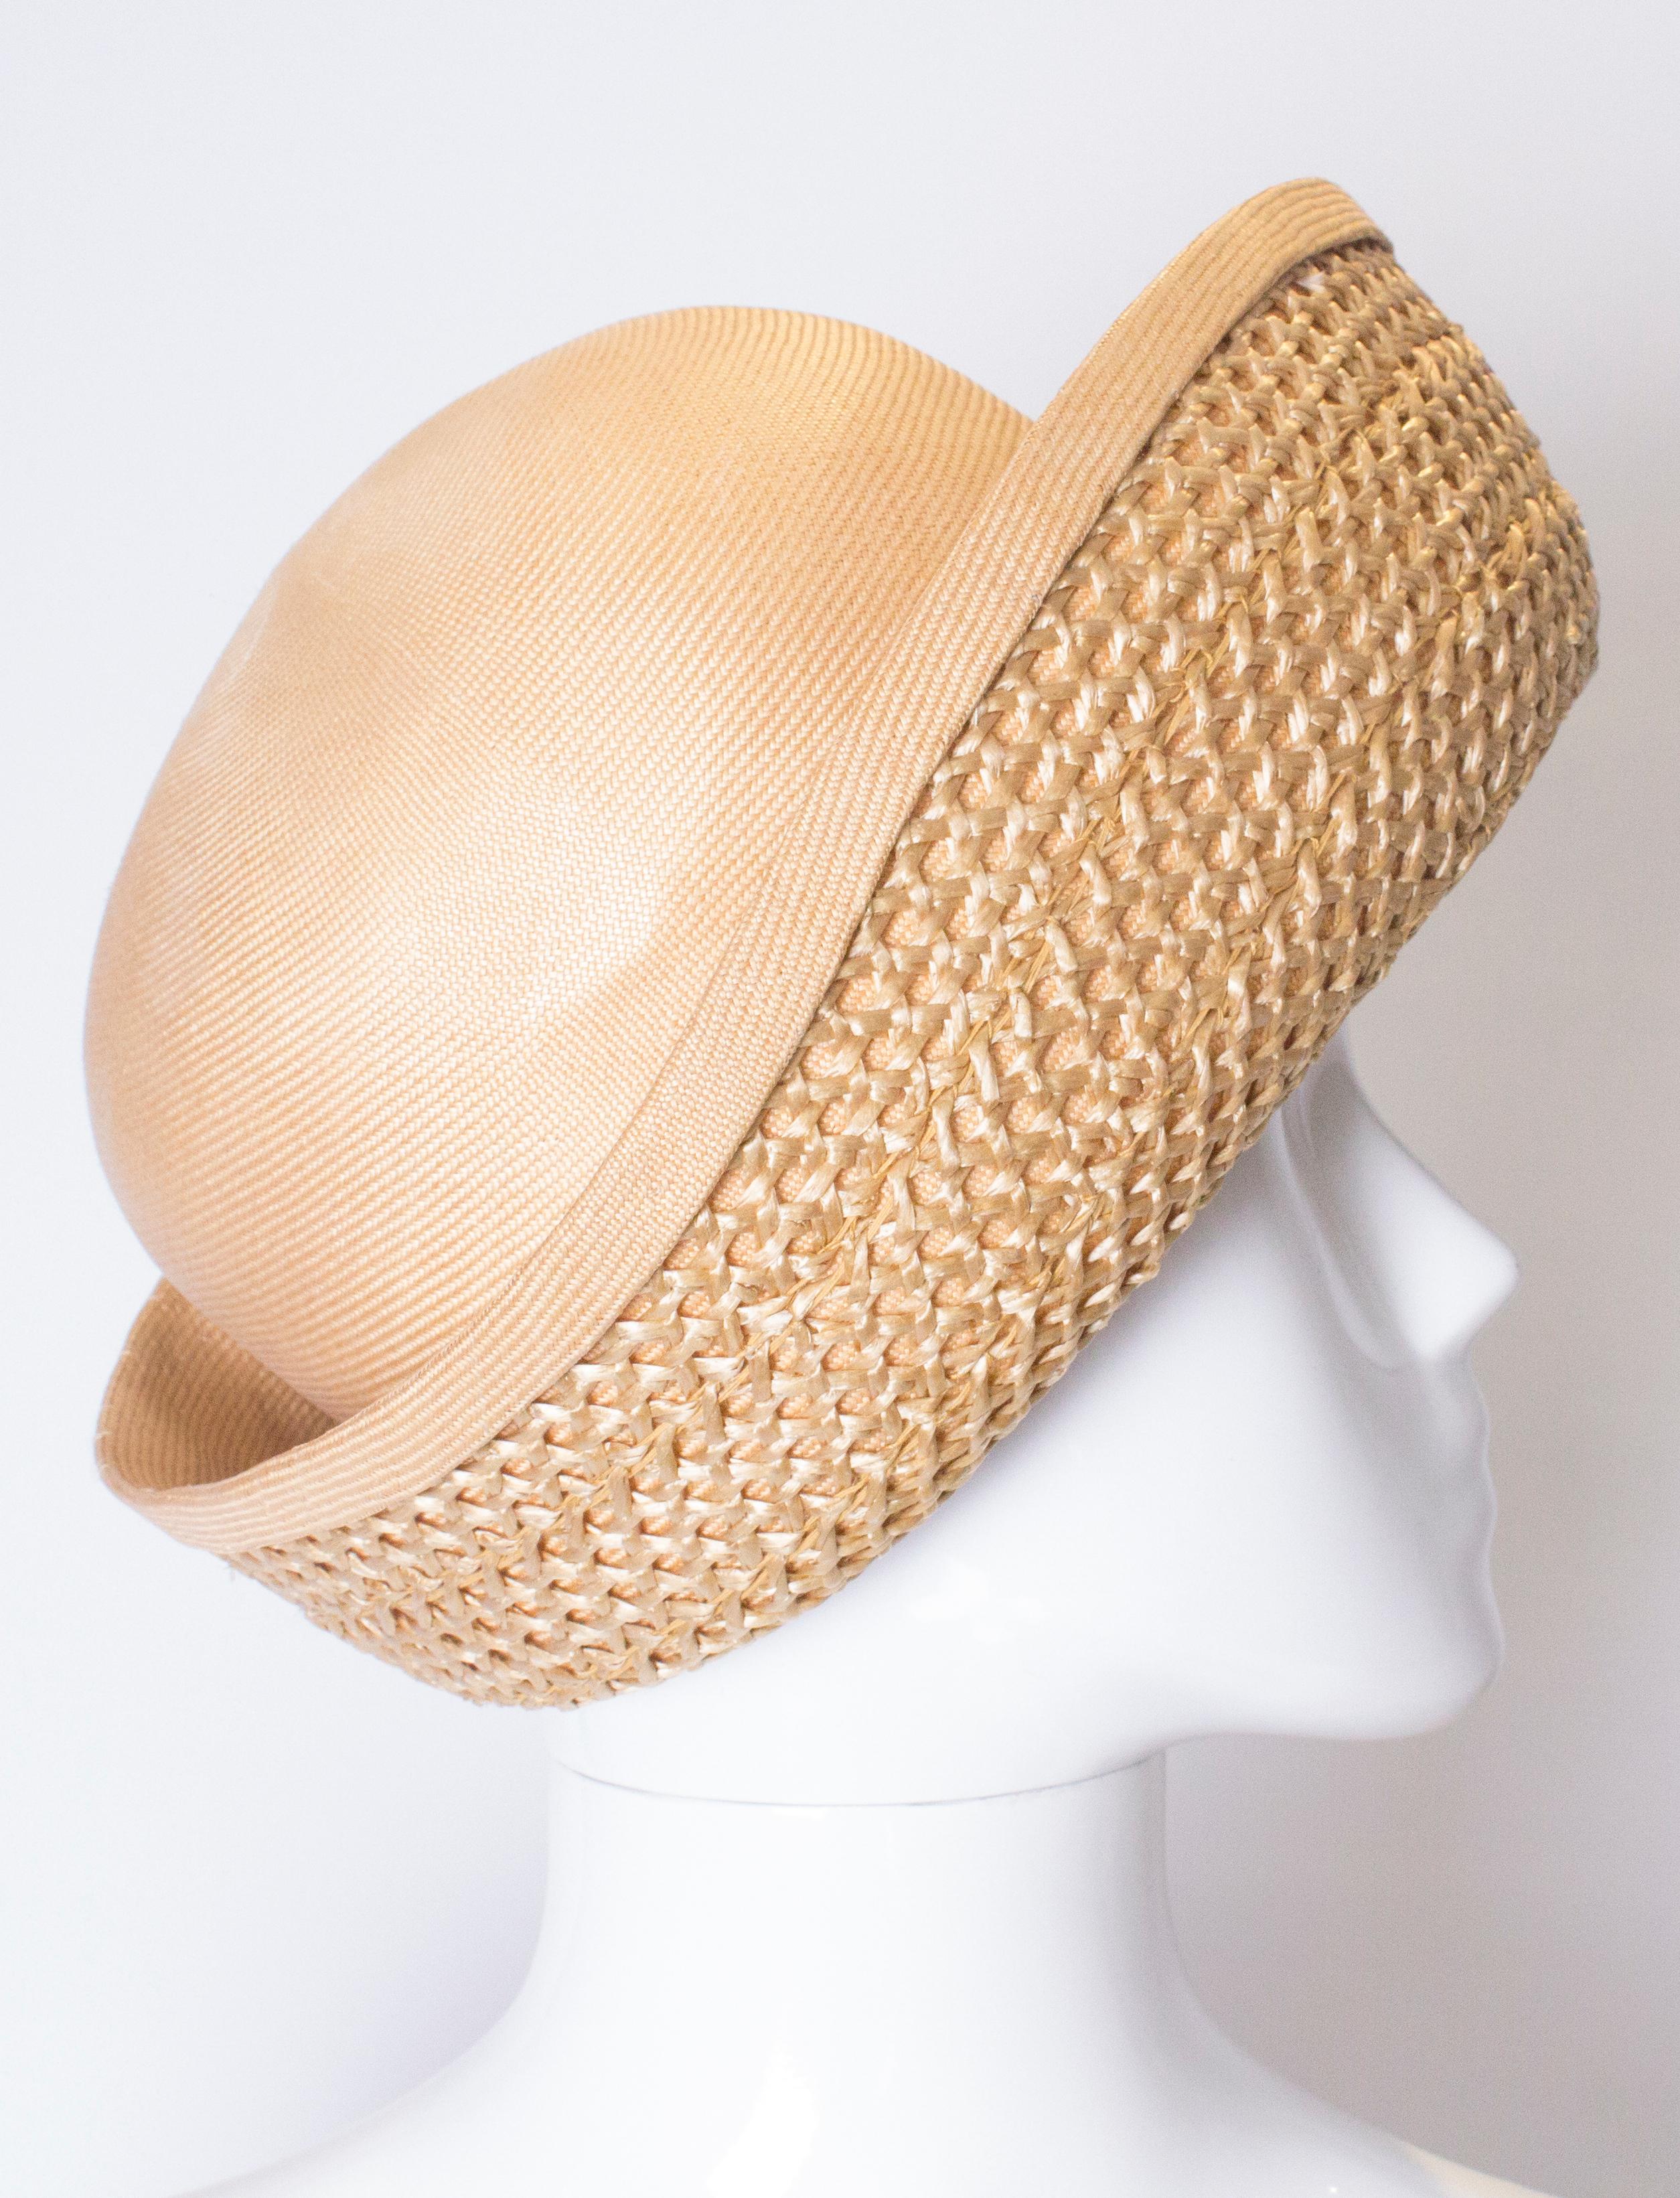 A head turning vintage hat by Harvey Nichols. The hat has a upturned brim in a woven style.
Inner circumference 24''